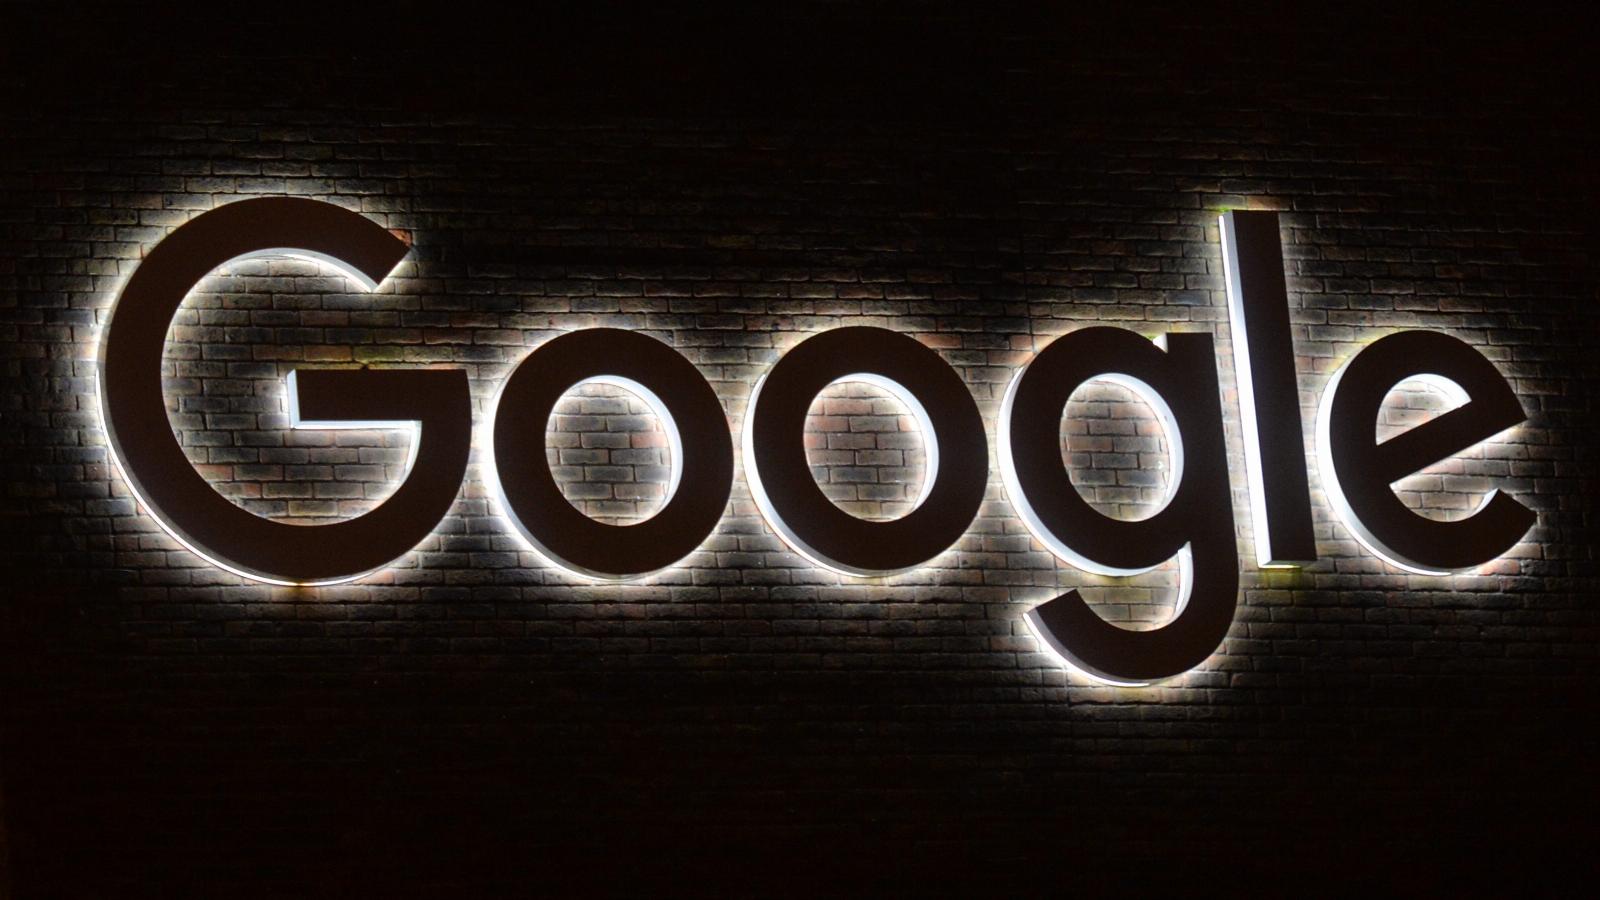 Google is making it easier to find and remove personal info, explicit images from Search